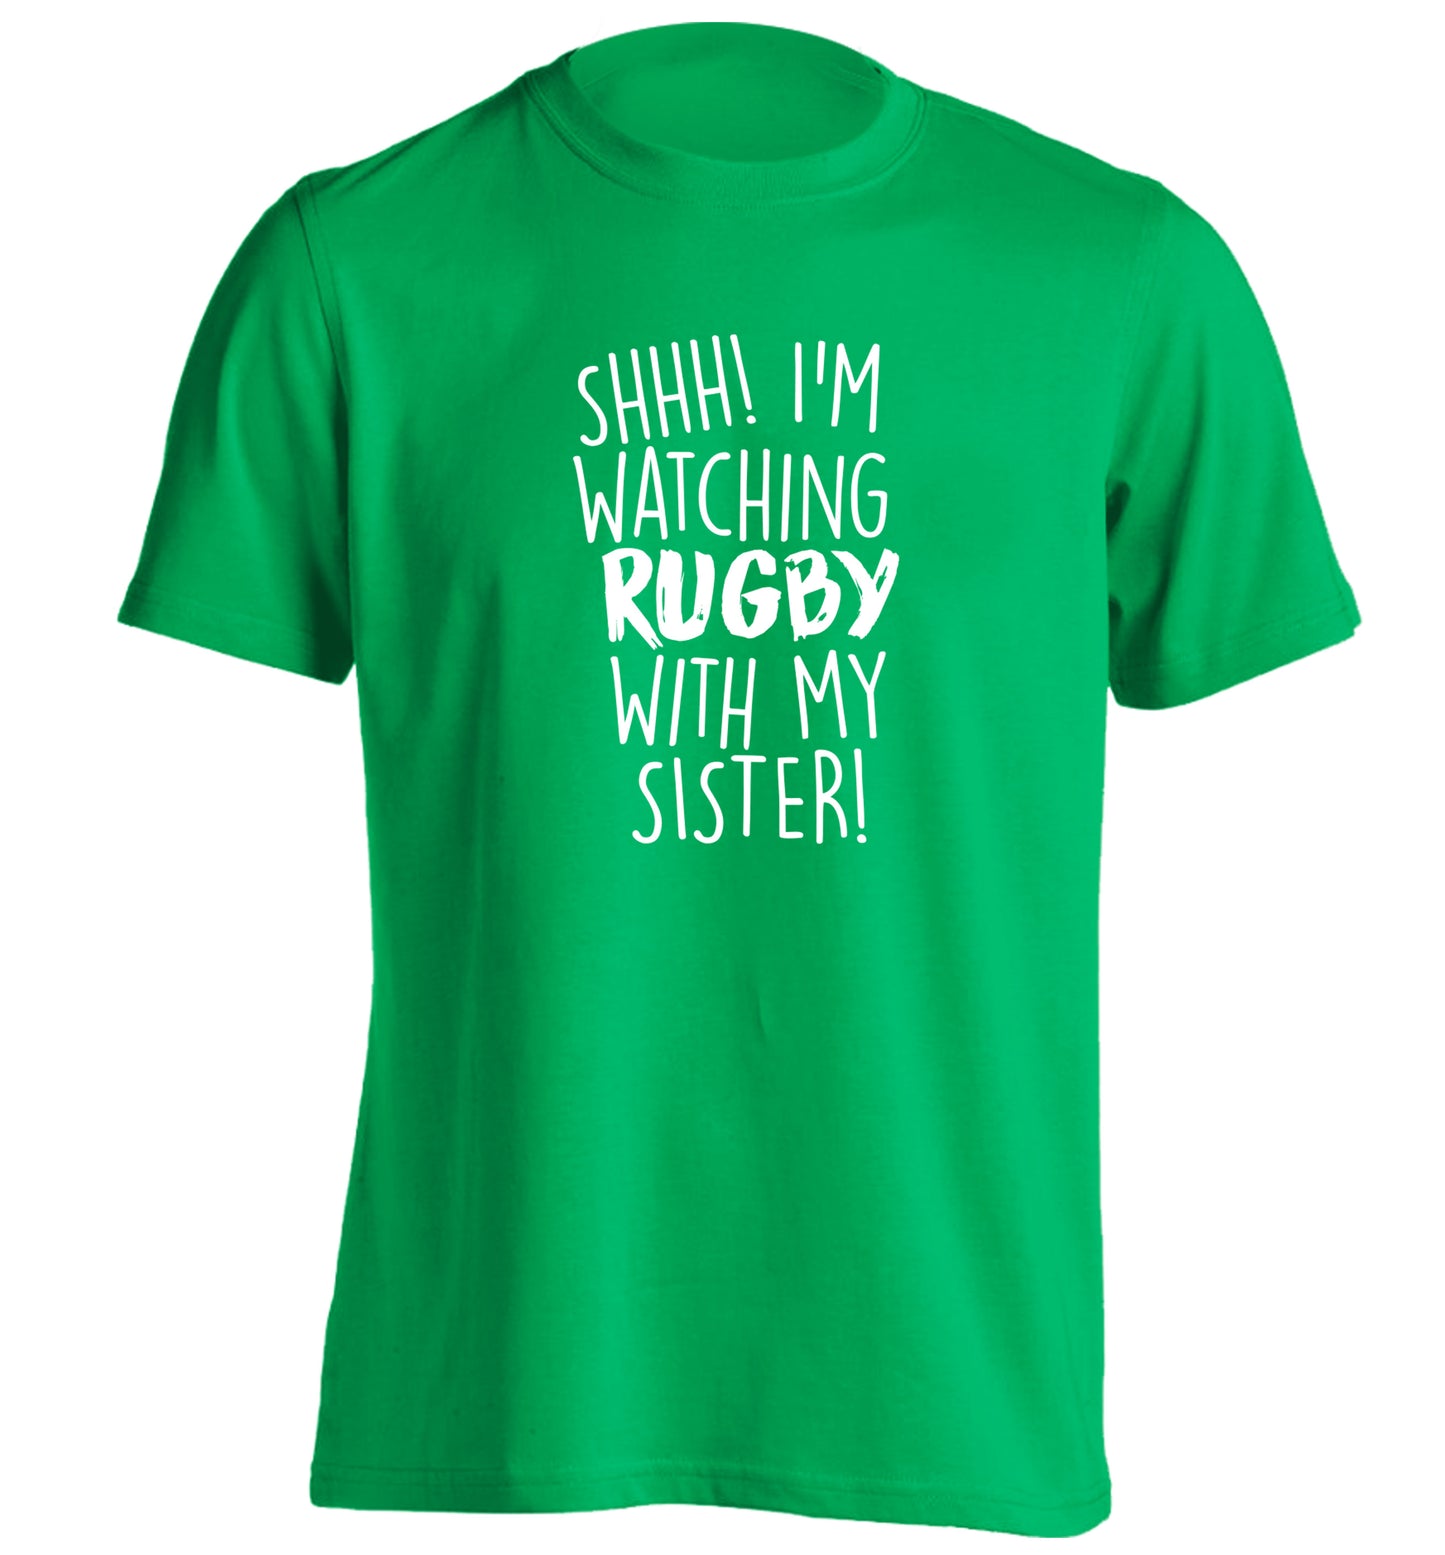 Shh... I'm watching rugby with my sister adults unisex green Tshirt 2XL